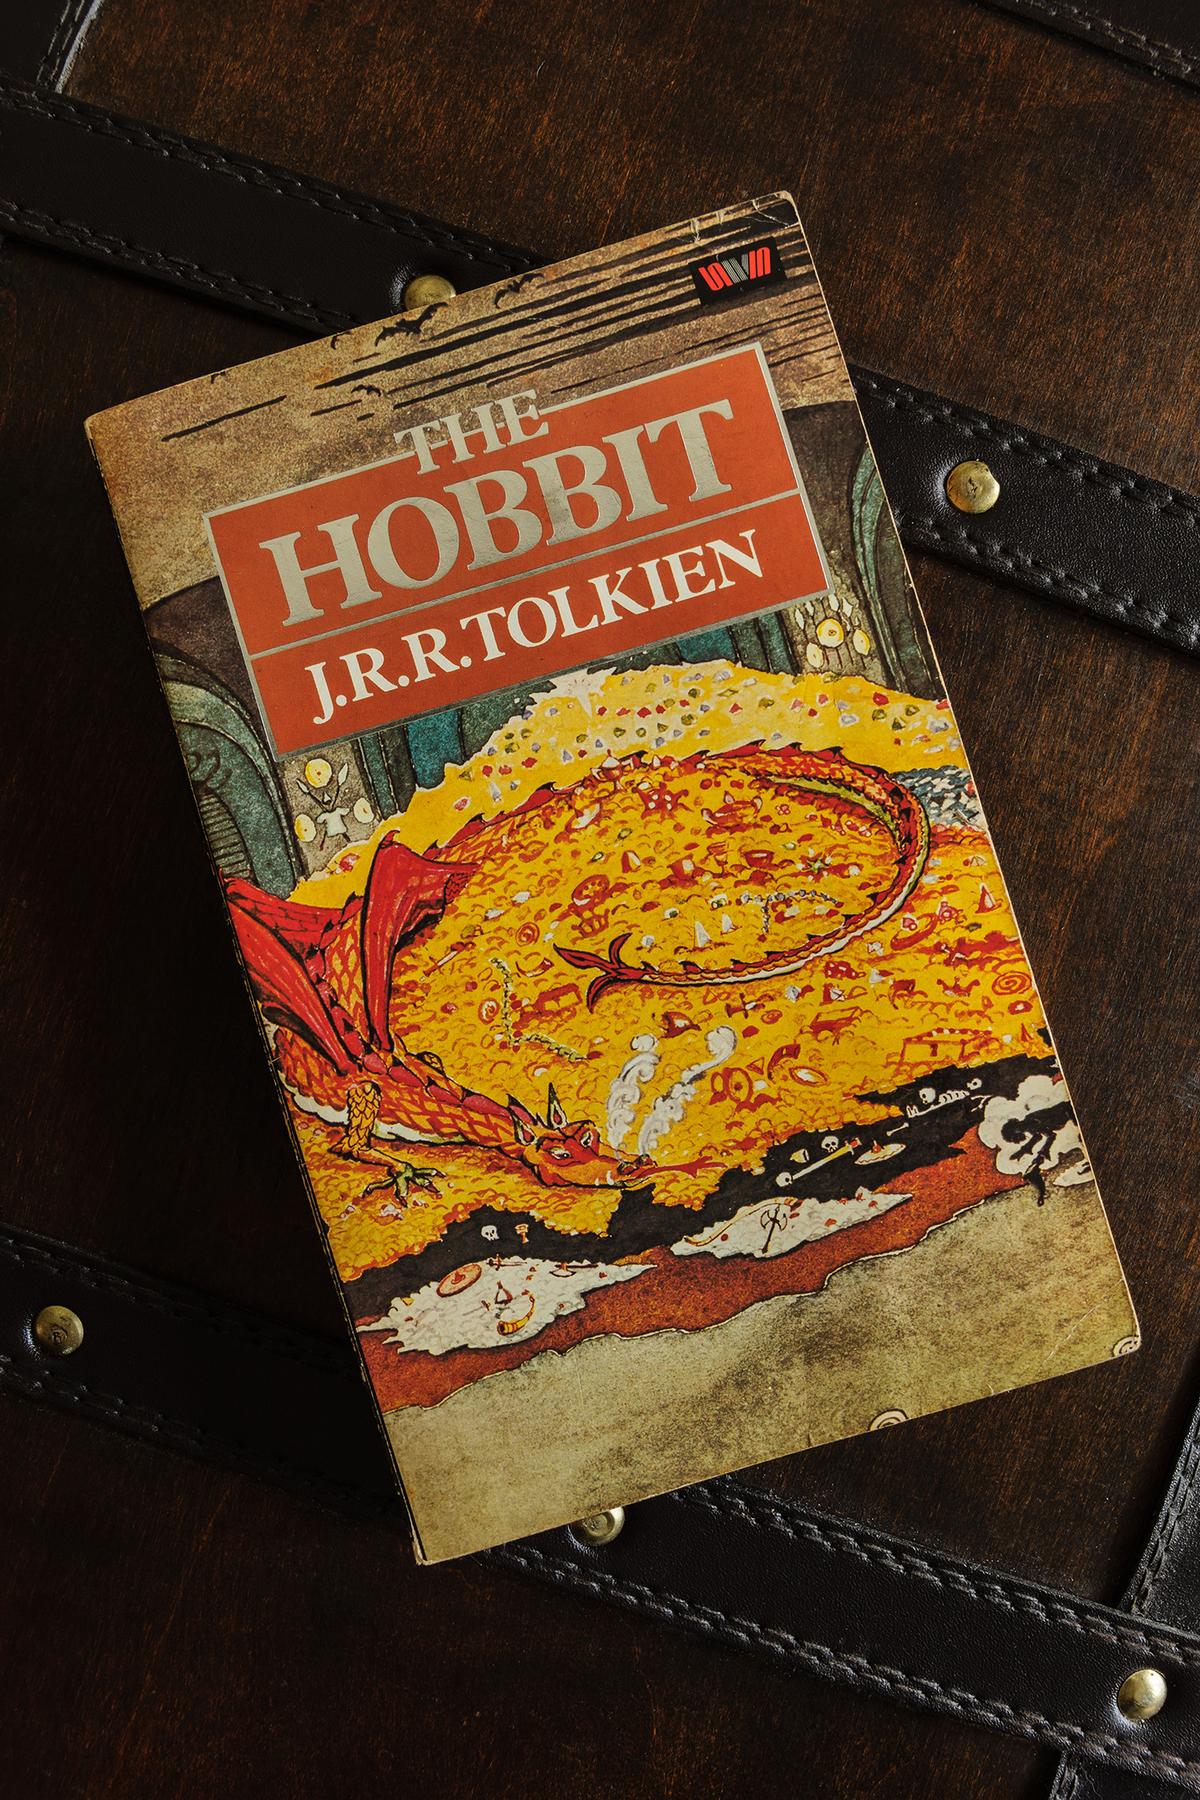  A vintage paperback edition of "The Hobbit" with cover art taken from “Conversation With Smaug,” illustrated and written by J.R.R. Tolkien, 1937. (David Pimborough/Shutterstock)